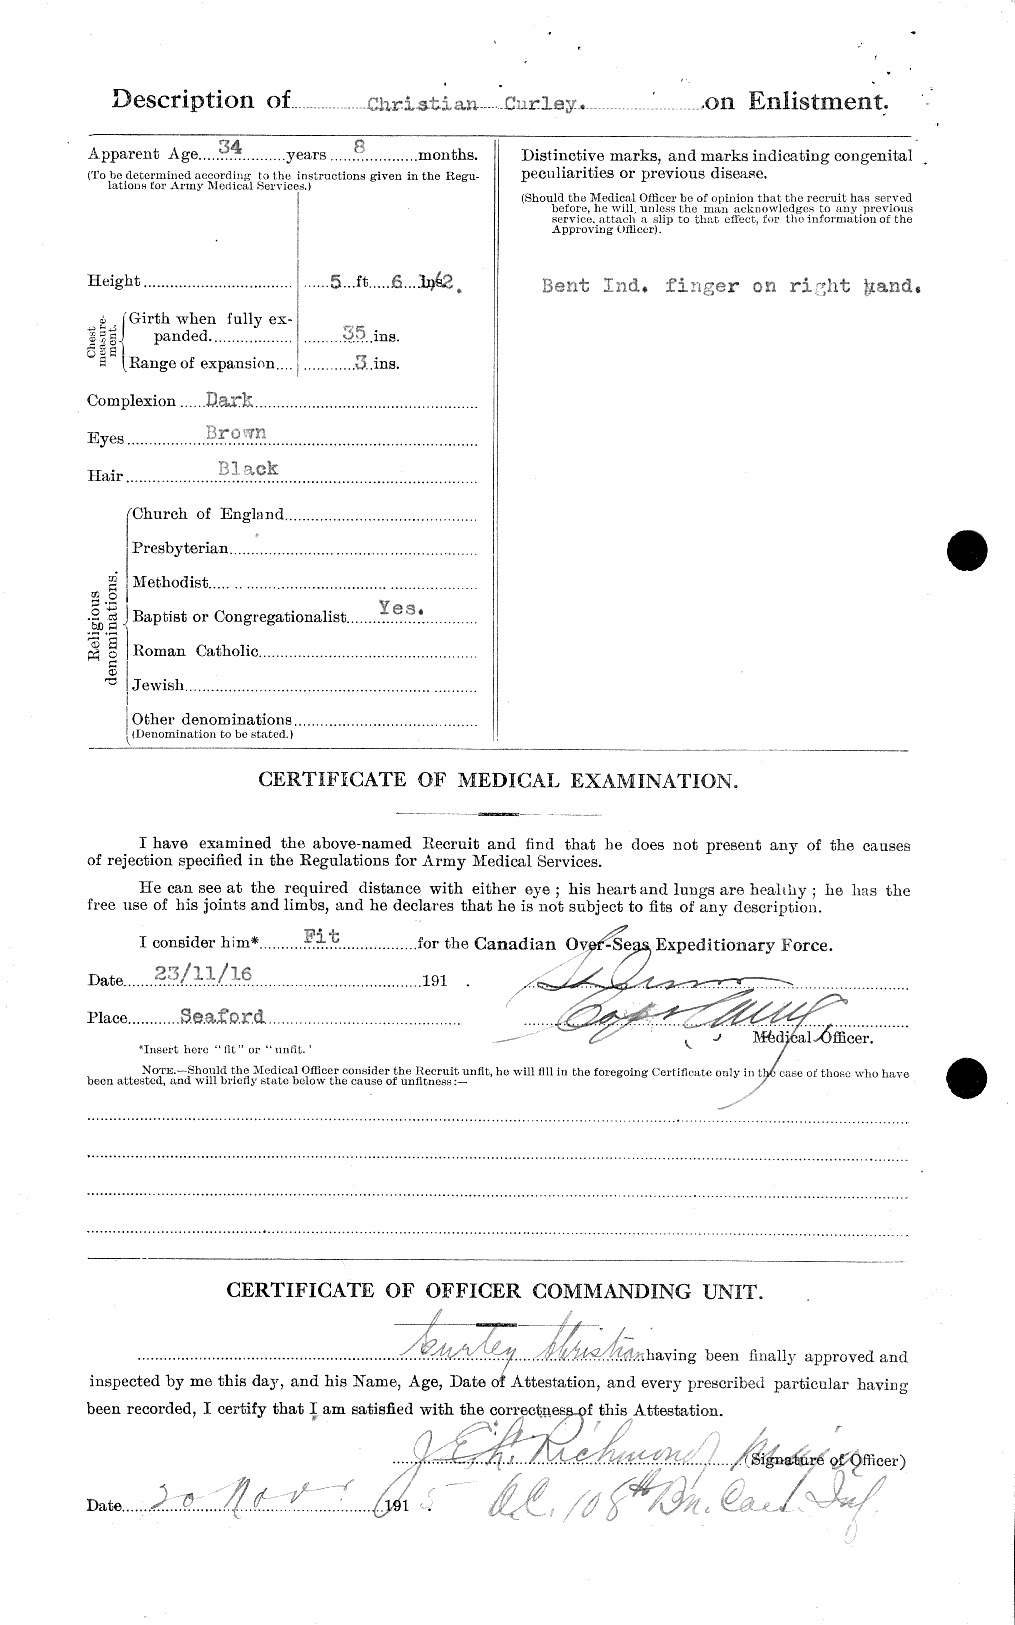 Personnel Records of the First World War - CEF 021657b